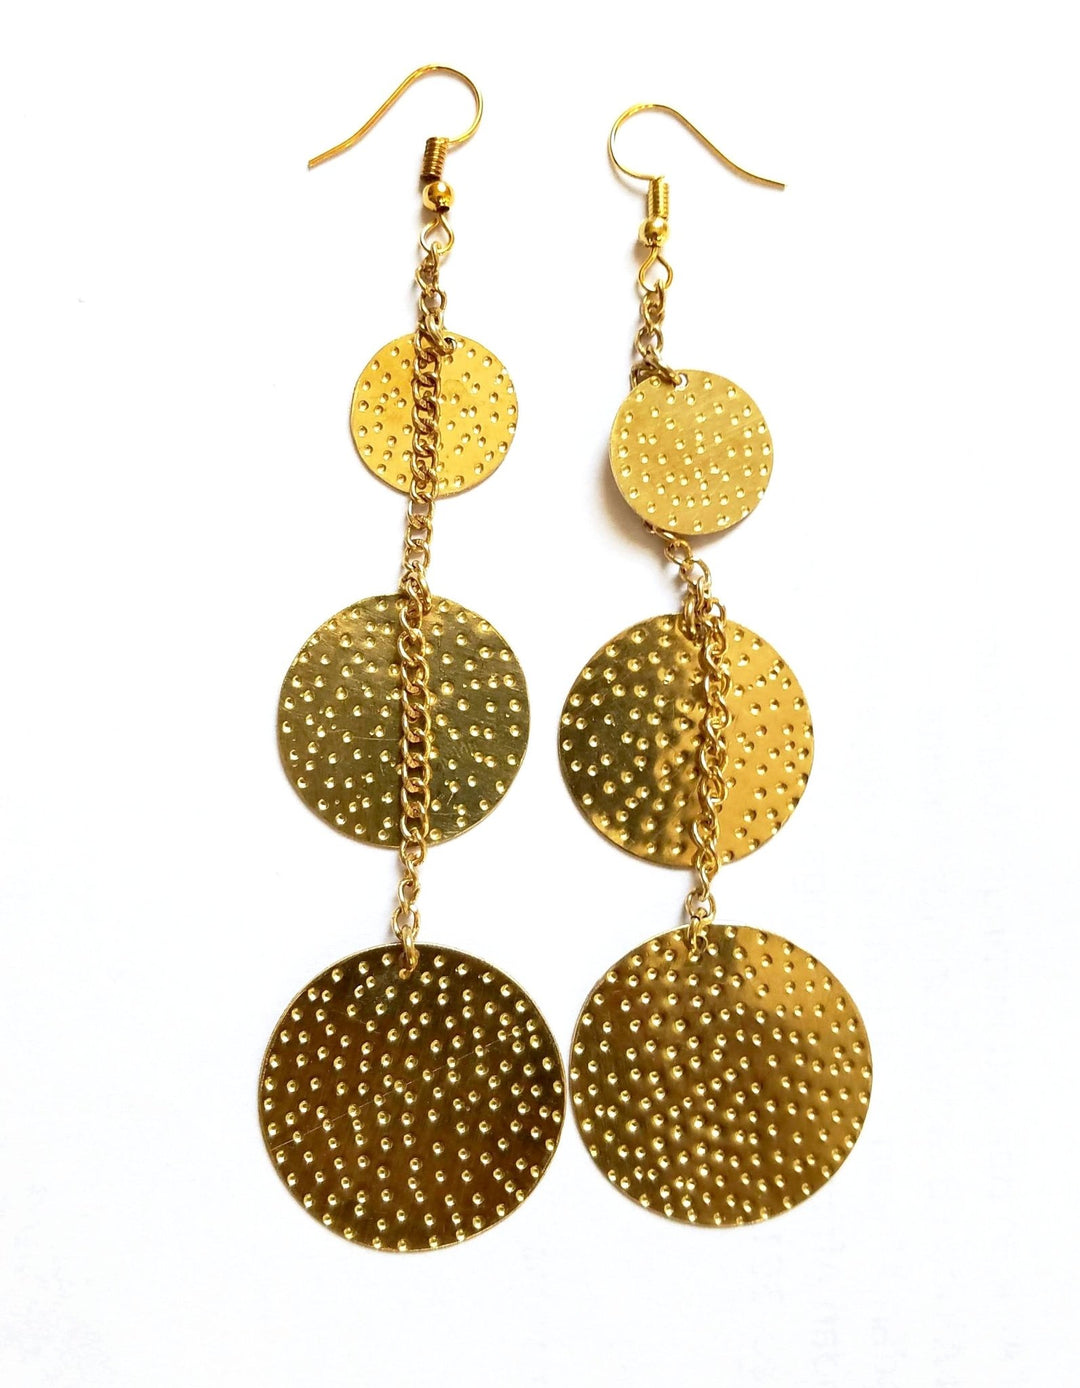 Upepo African Earrings - The Afropolitan Shop